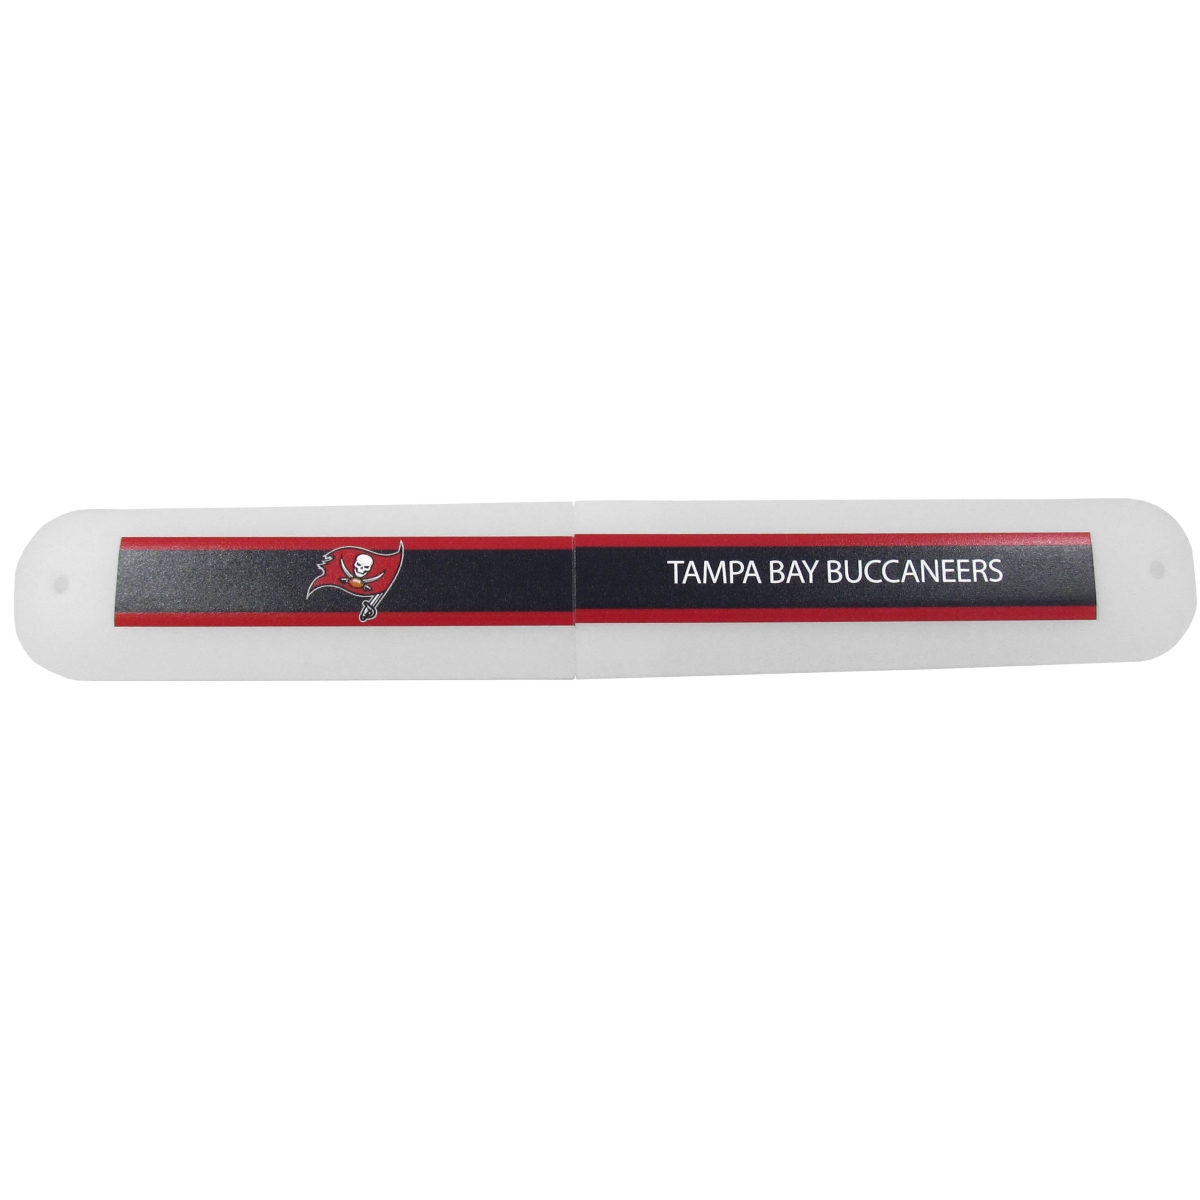 Picture of Siskiyou FTBC030 Unisex NFL Tampa Bay Buccaneers Travel Toothbrush Case - One Size